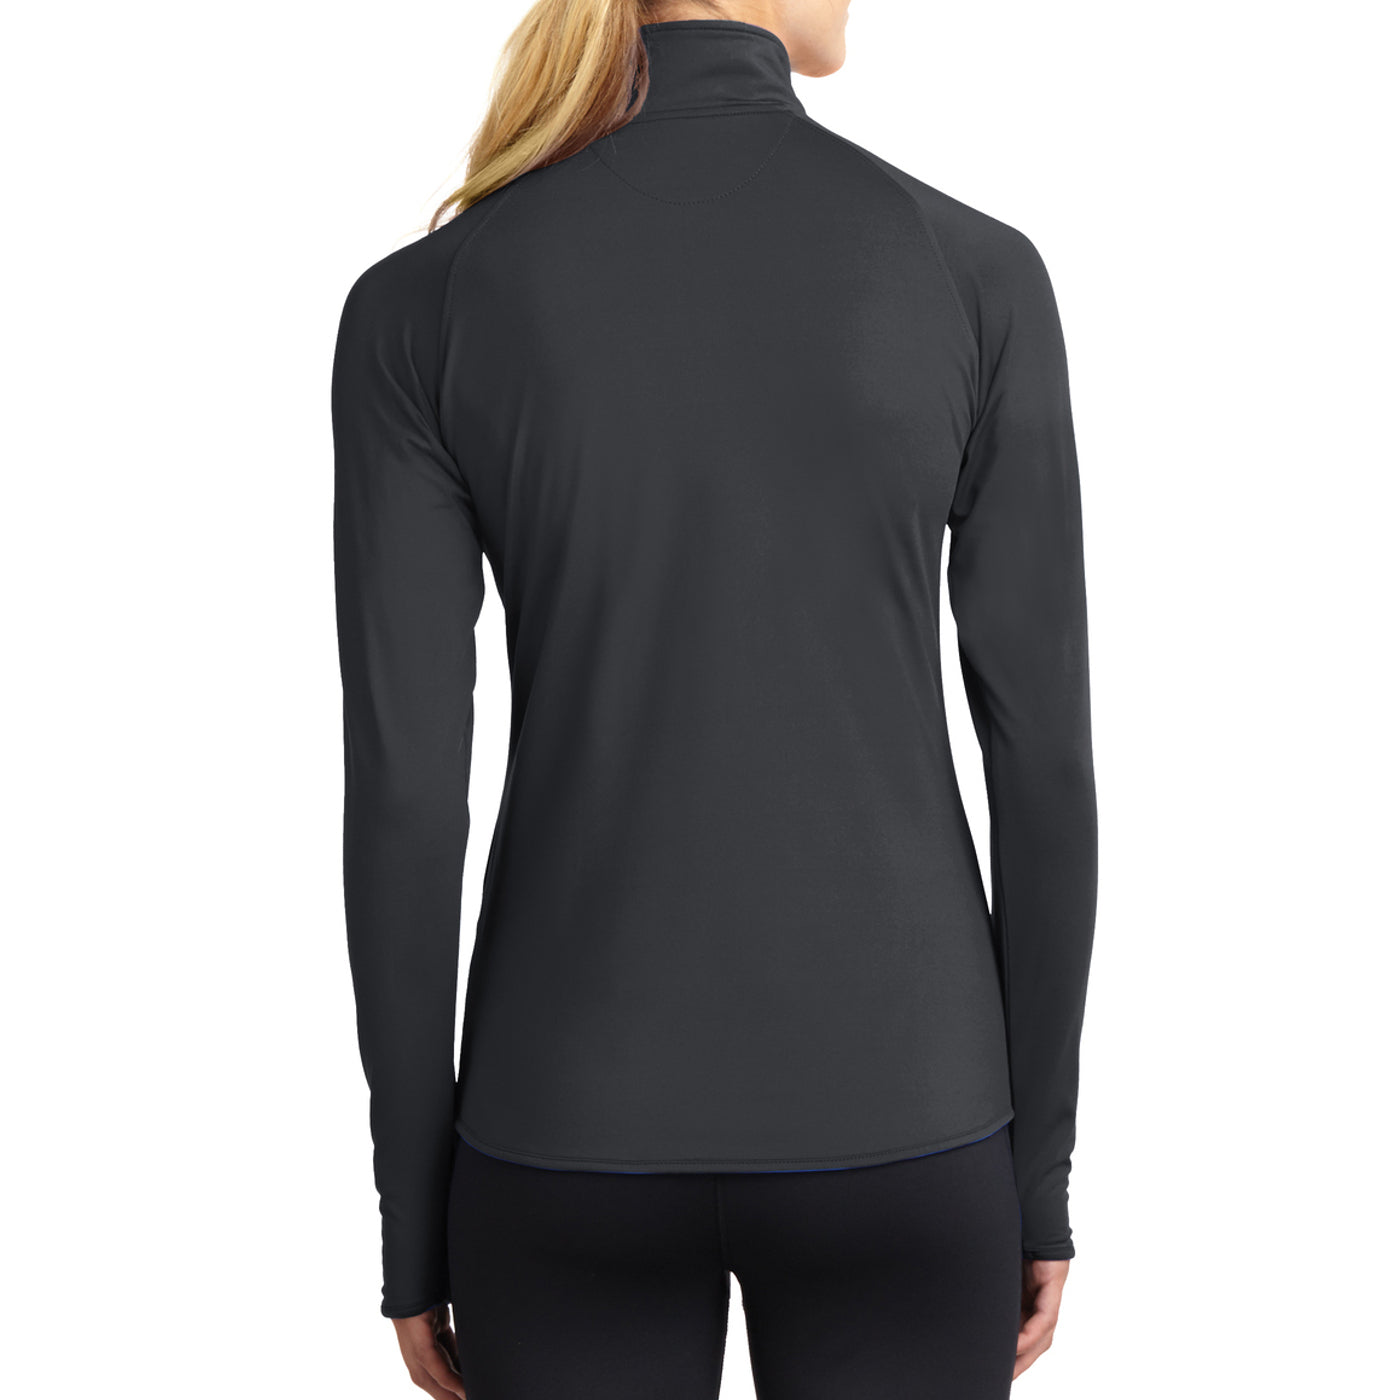 Women's Sport Wick Stretch 1/2 Zip Pullover - Charcoal Grey - Back